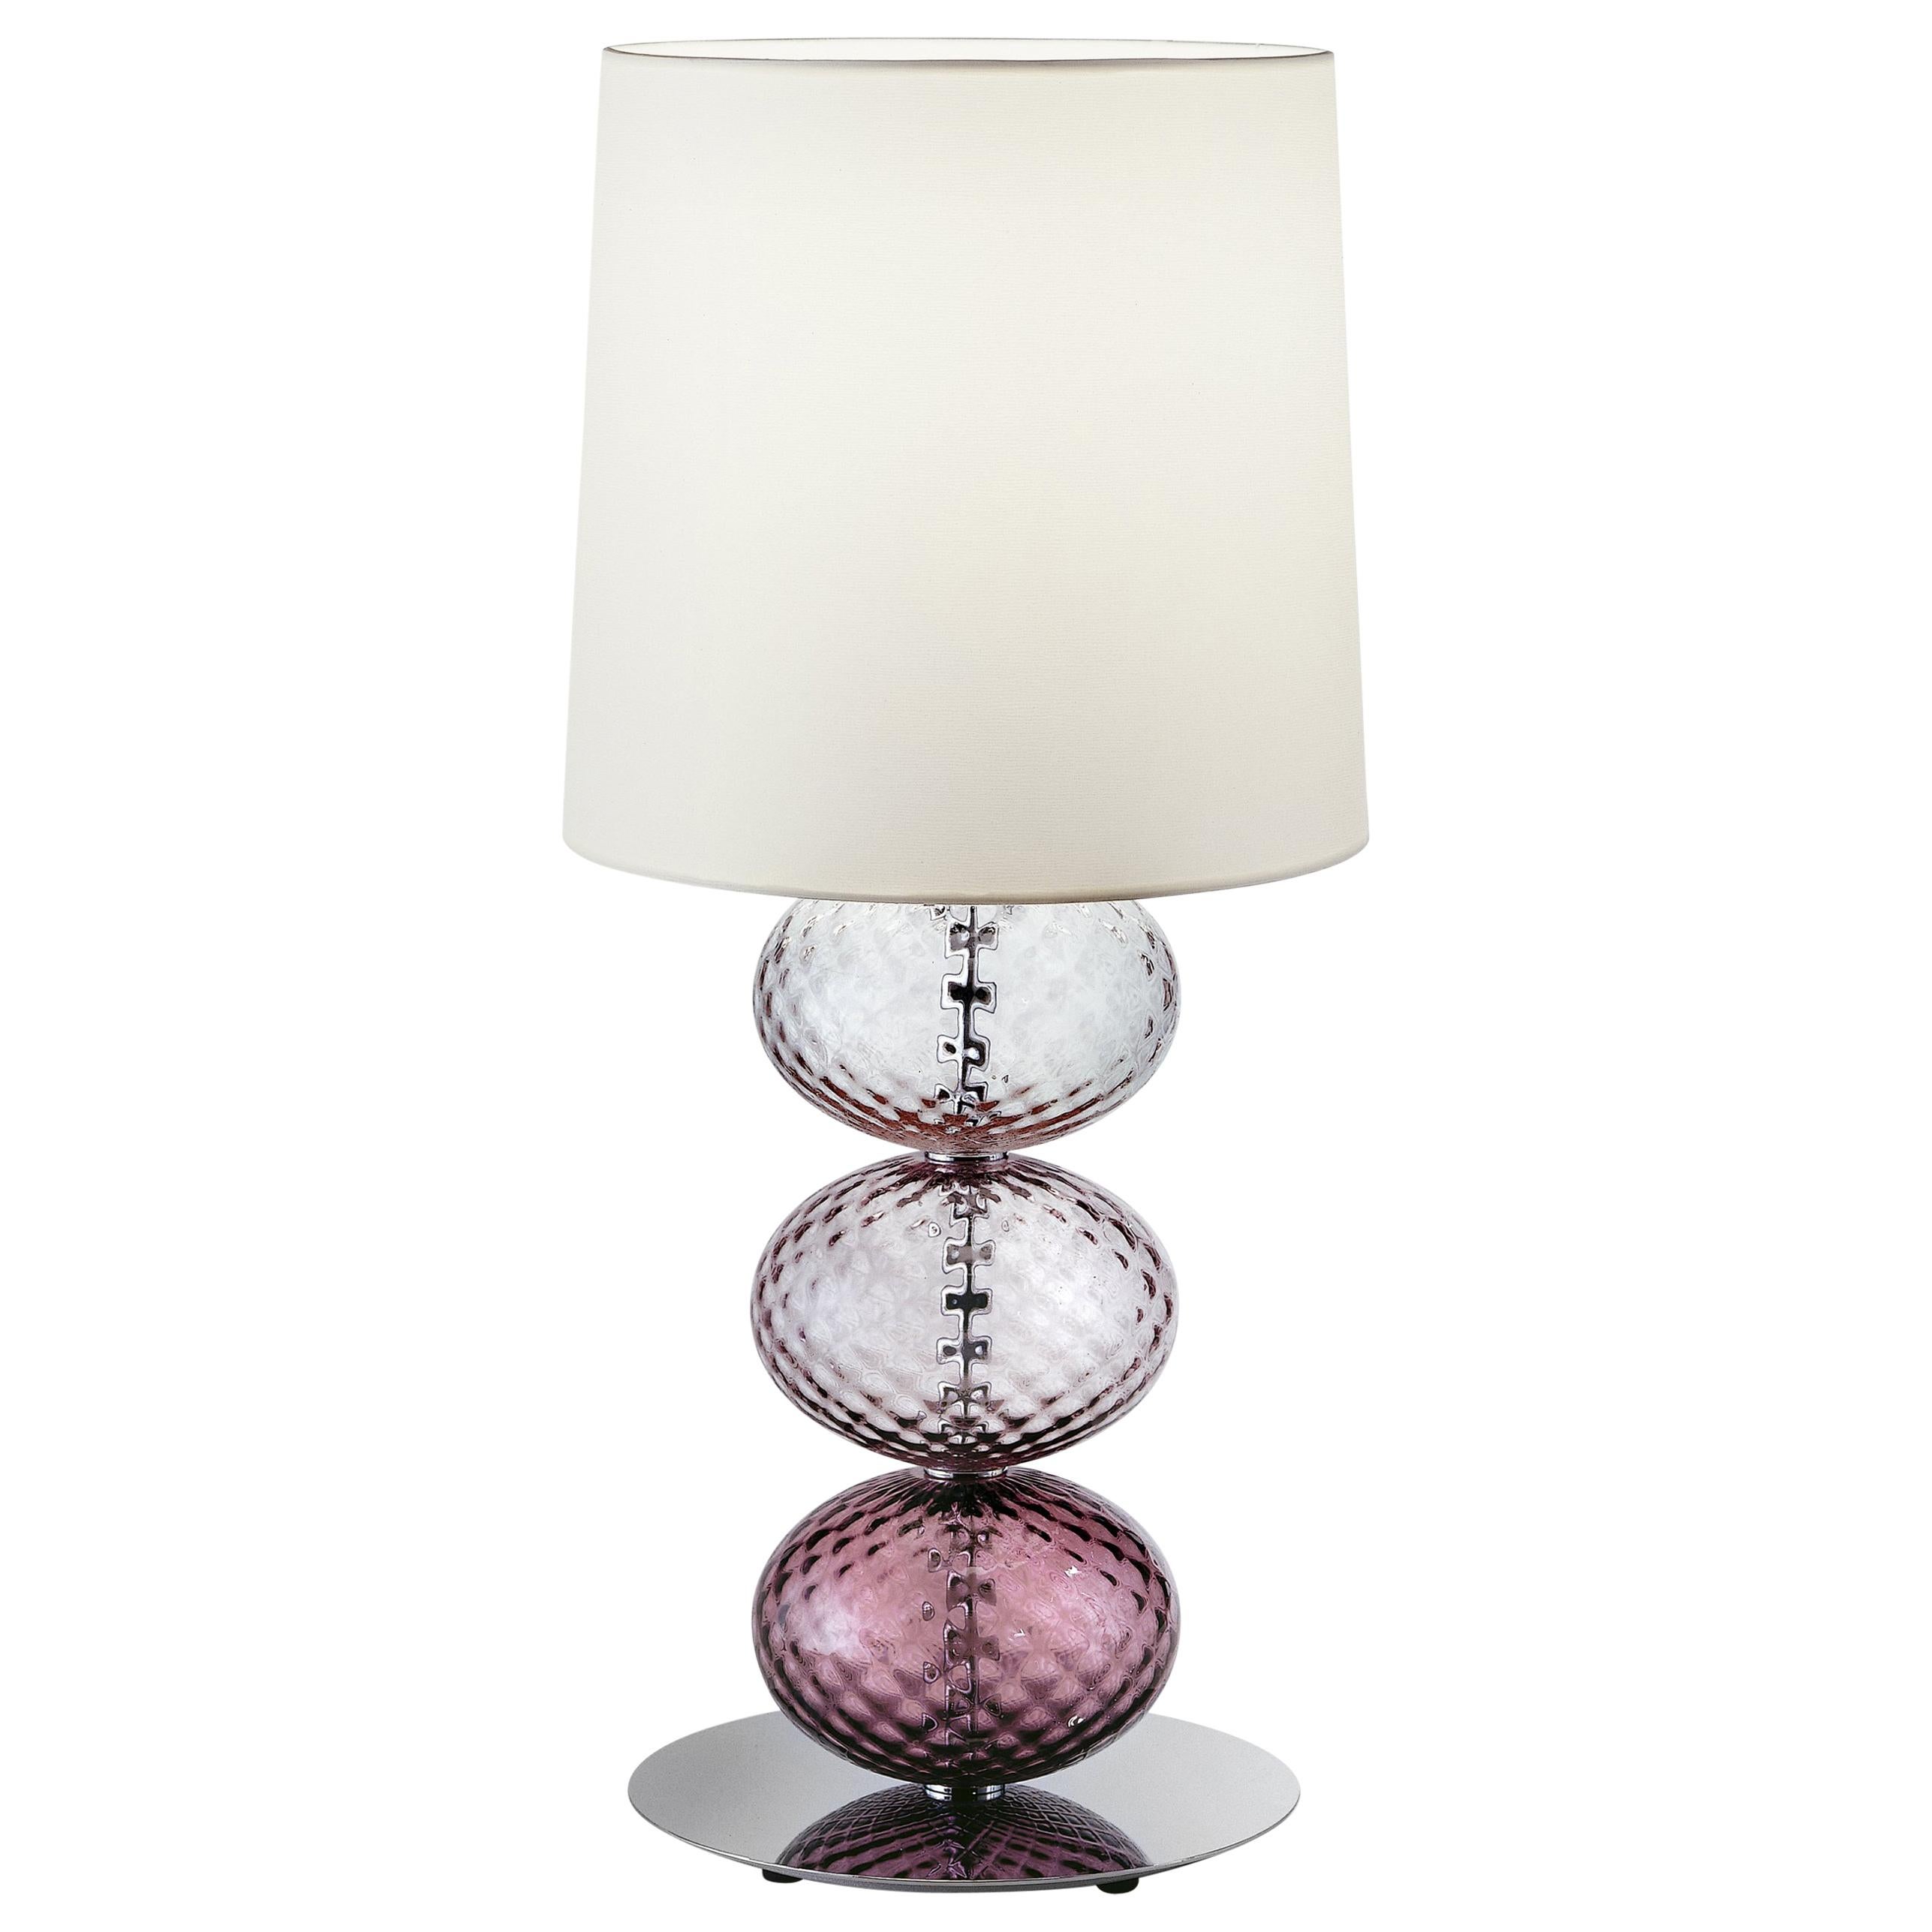 Abat Jour Table Lamp in Violet, Amethyst and Wisteria by Venini